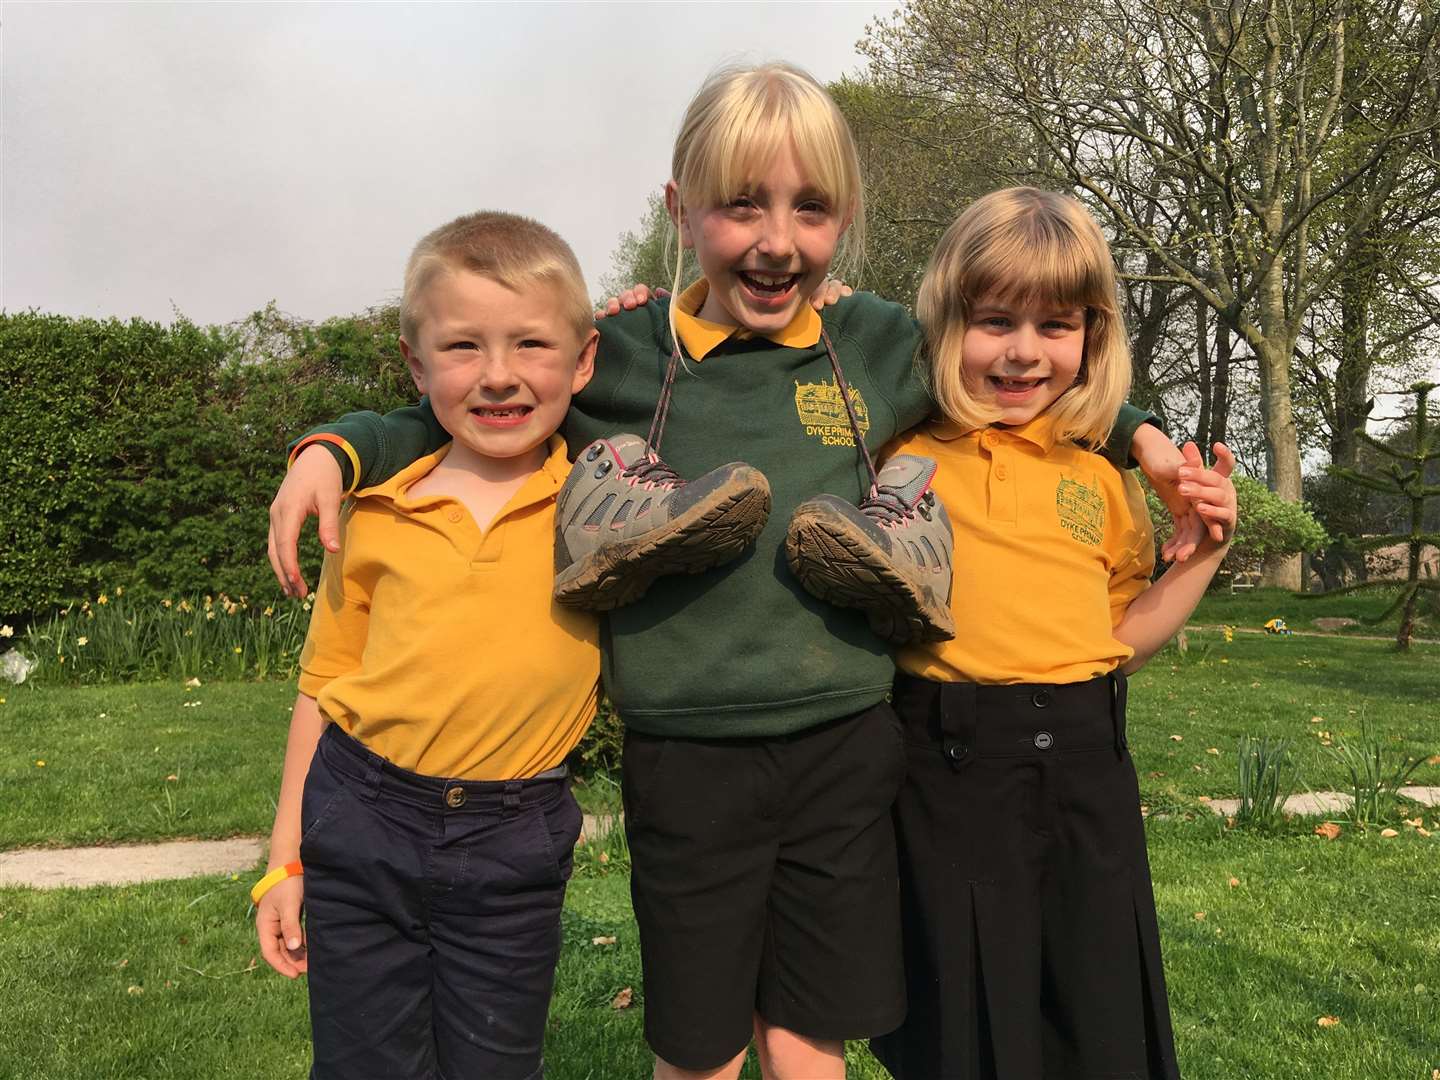 Keira (centre) with her brother Callum and cousin Emilia is raising money for two charities close to her heart.